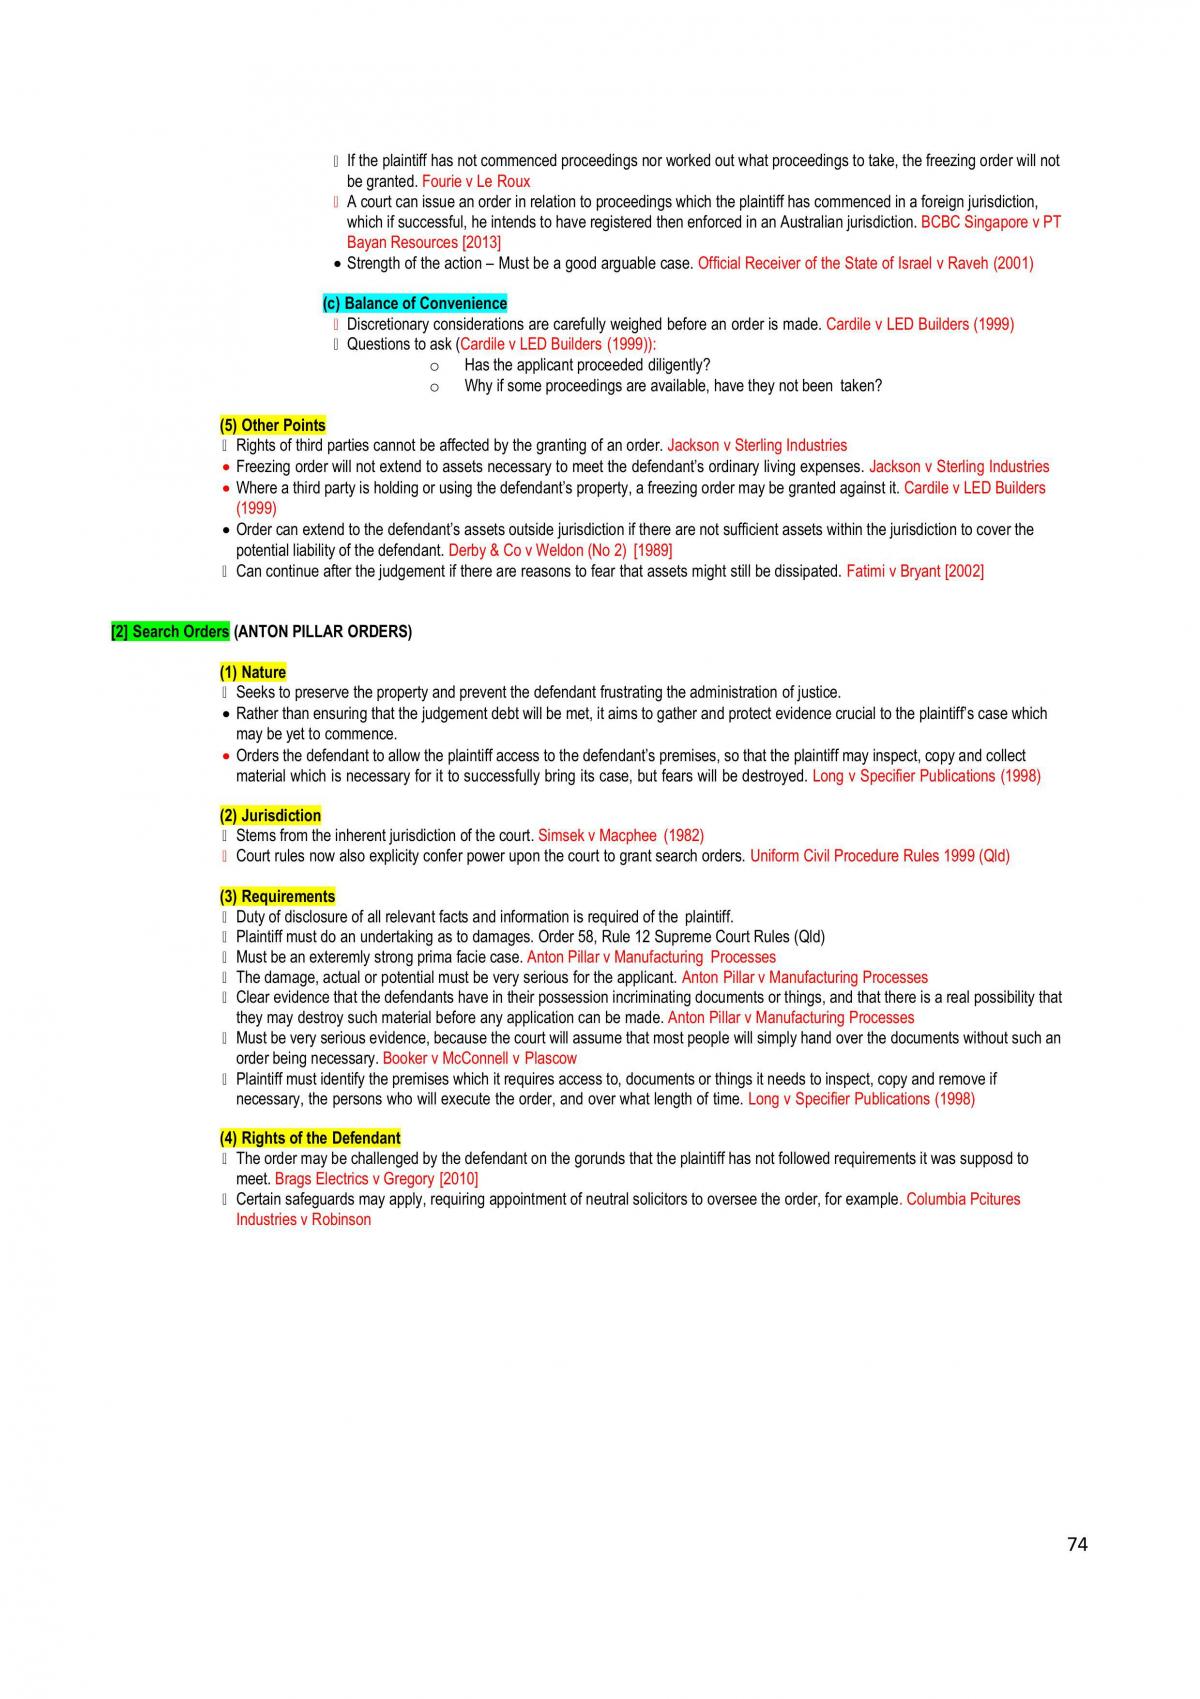 LAW2212 Complete Exam Notes - Page 74